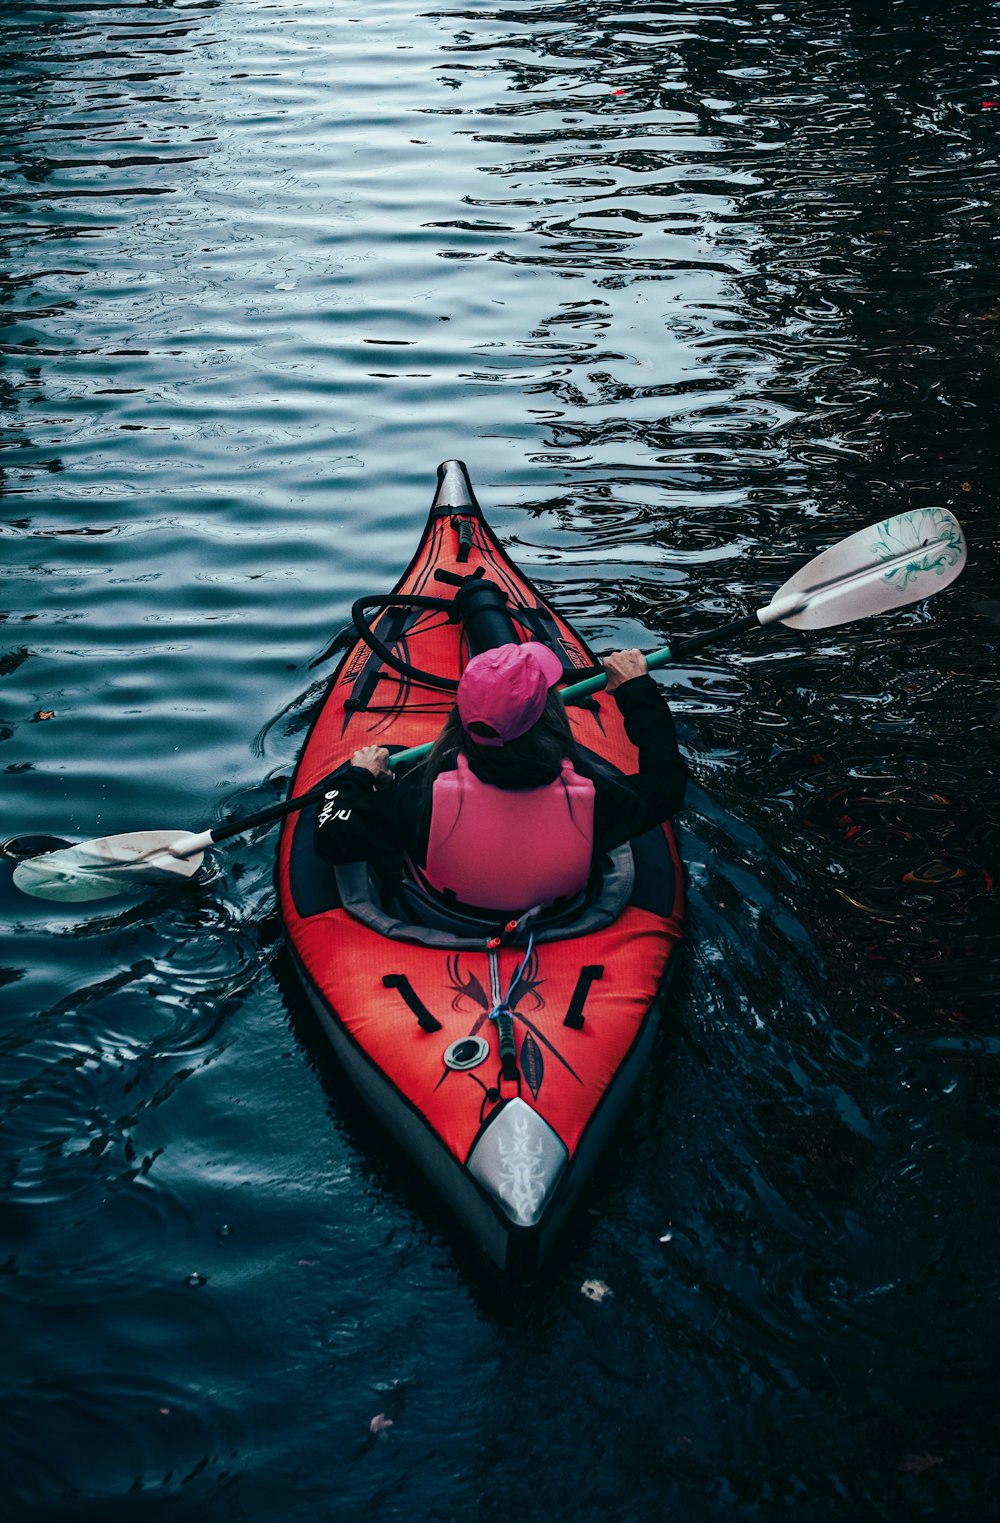 a person in a kayak in the water